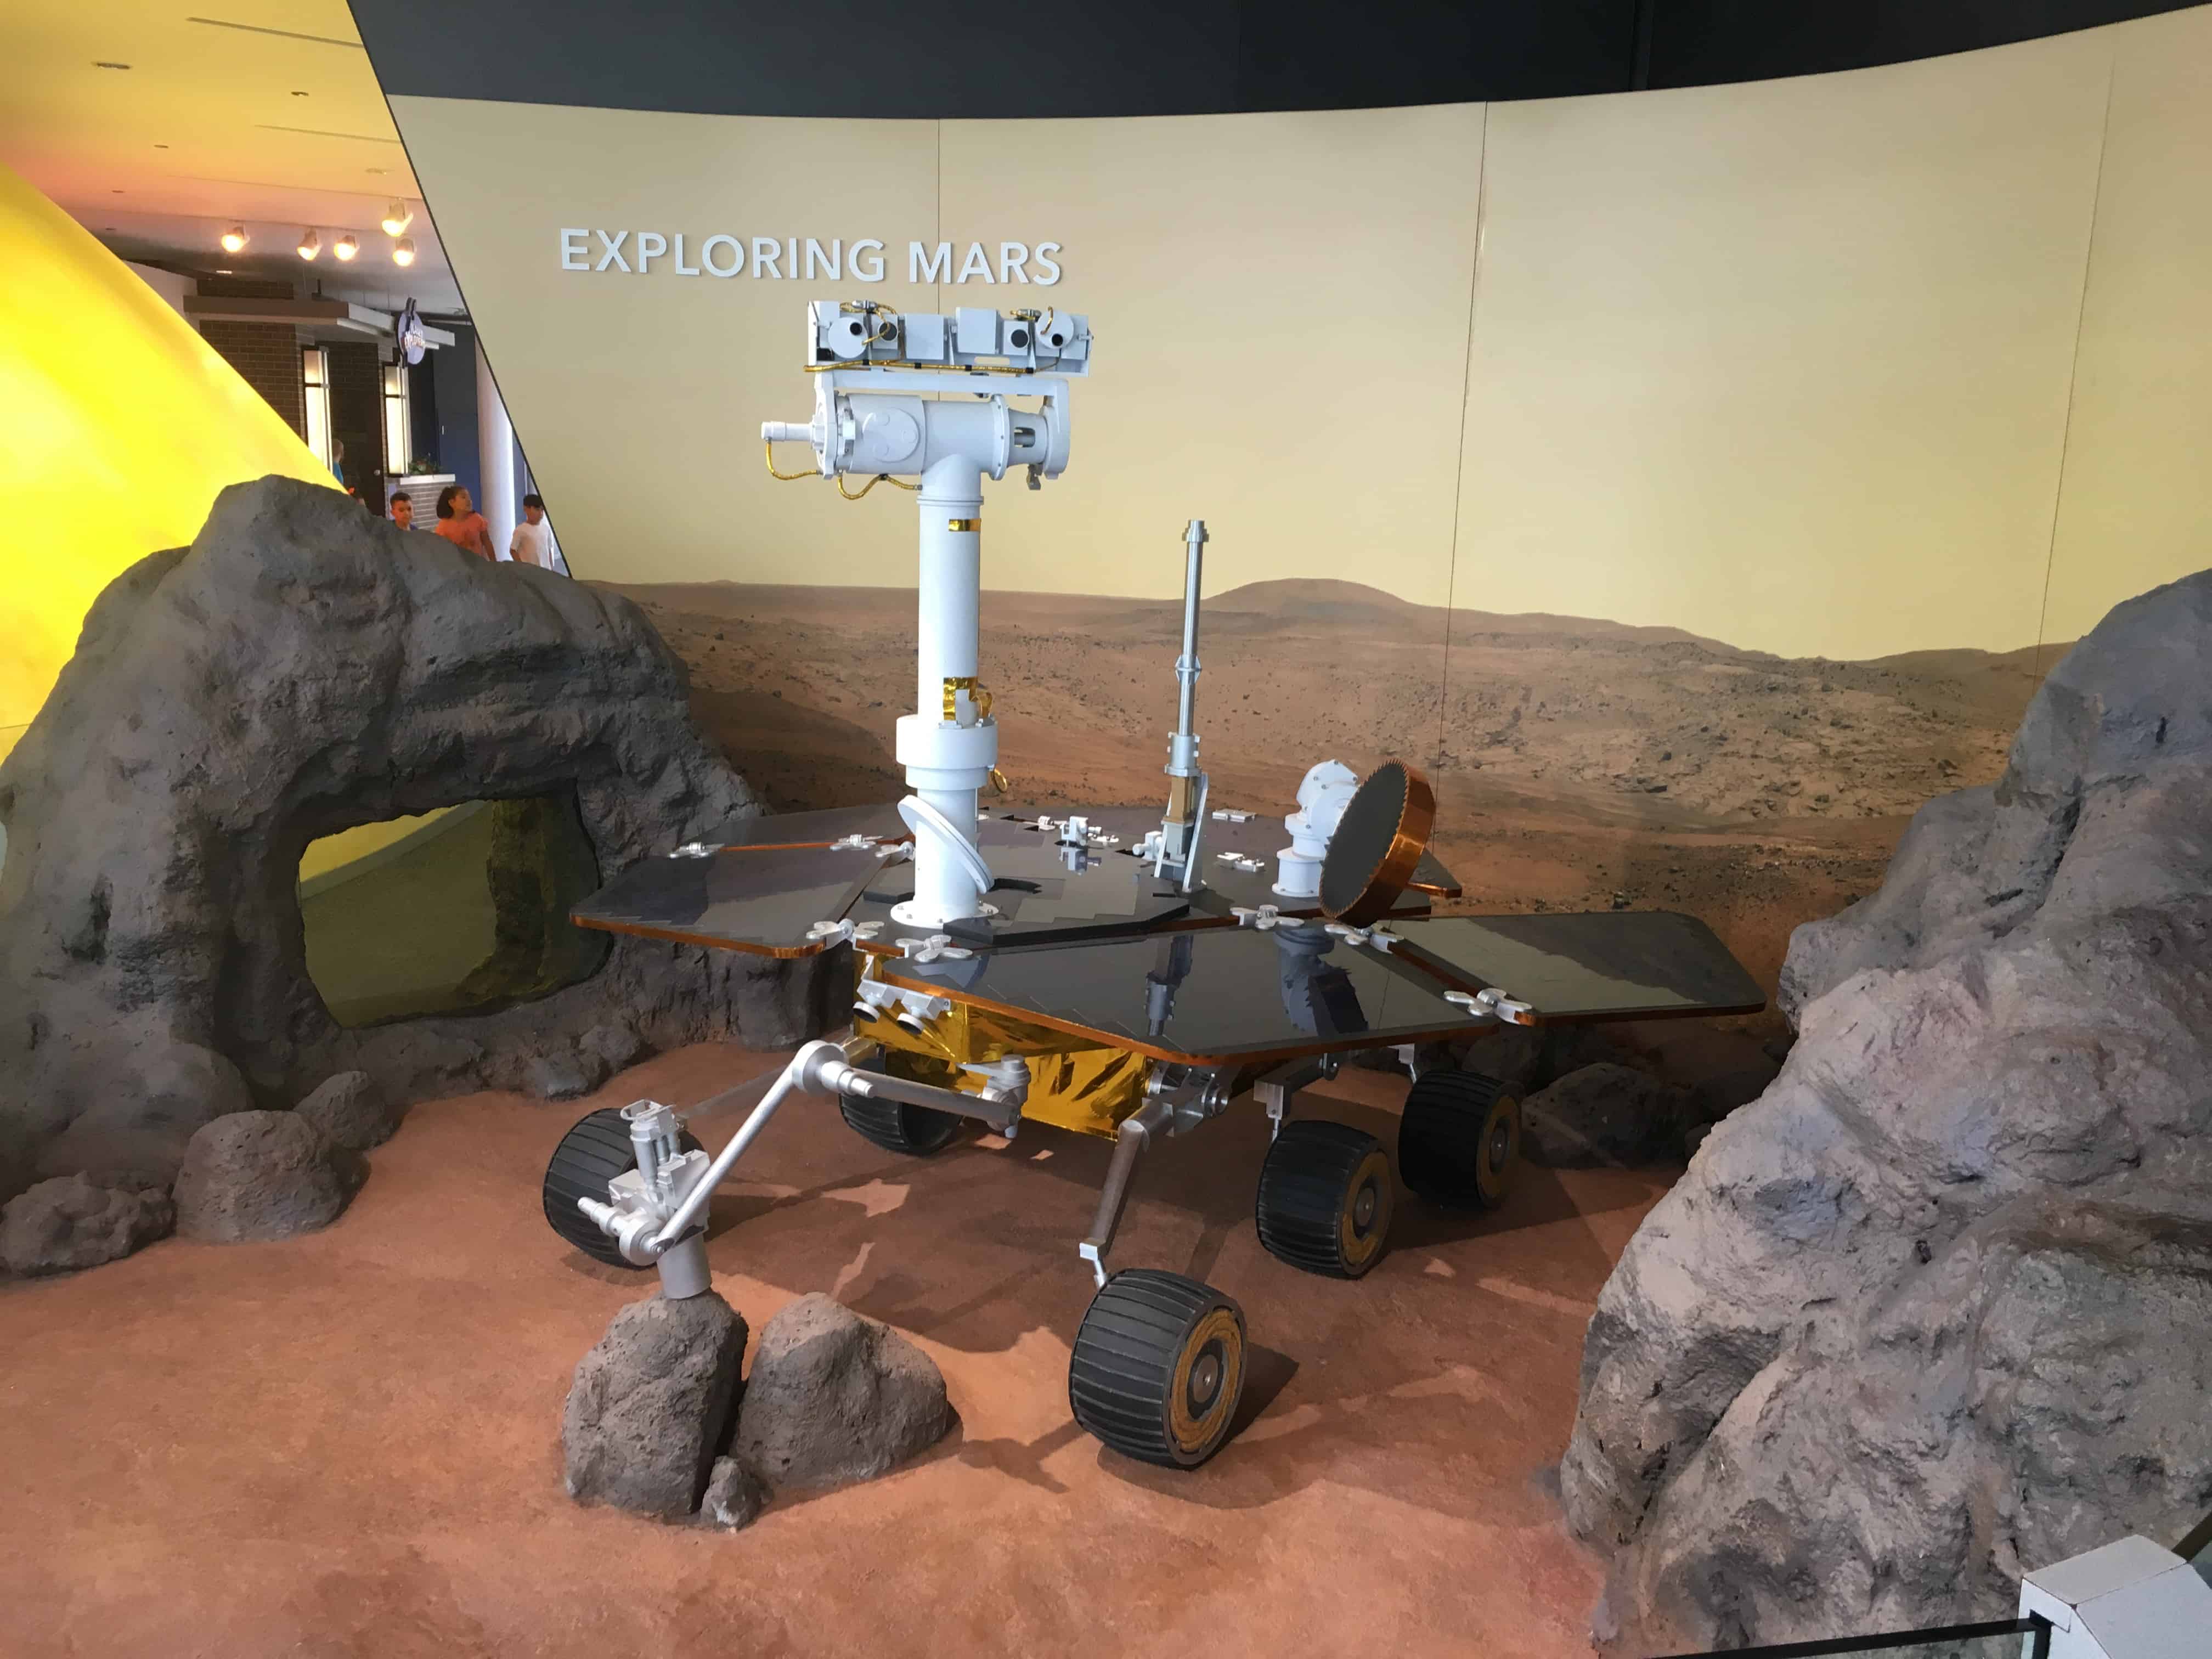 Mars rover in Our Solar System at the Adler Planetarium in Chicago, Illinois